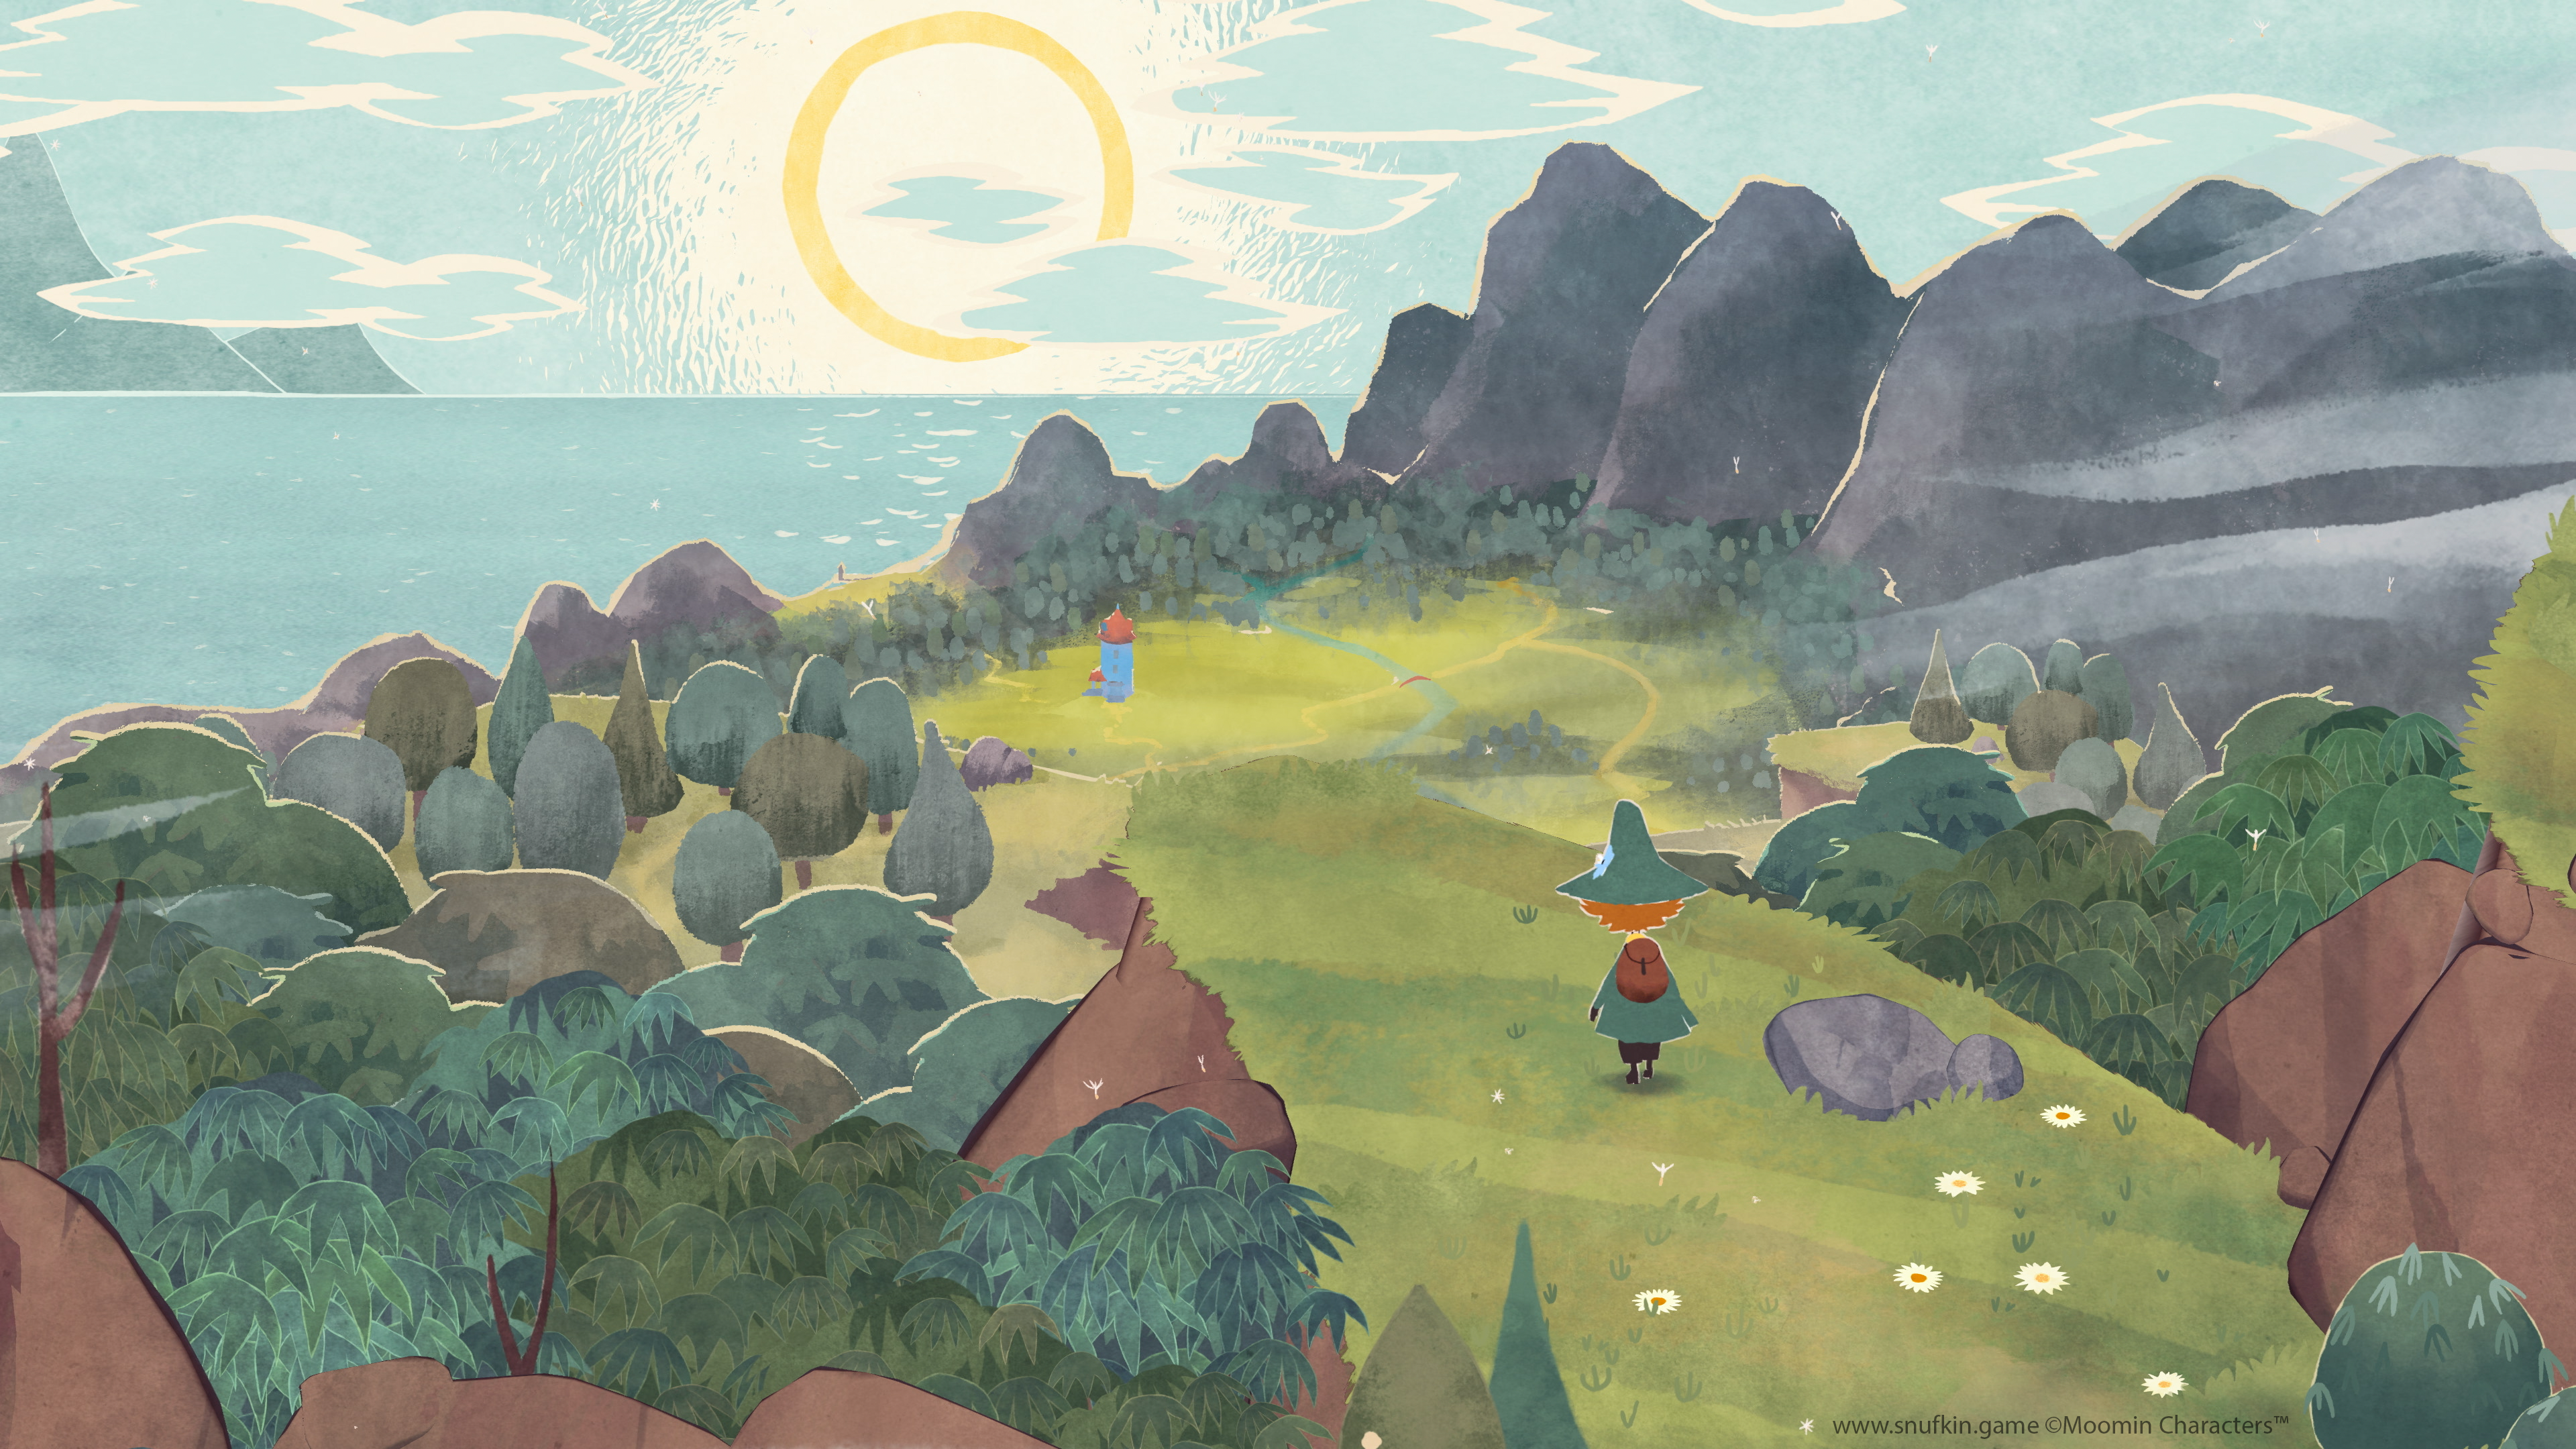 Snufkin looks down over Moominvalley in a Snufkin: Melody of Moominvalley screenshot.